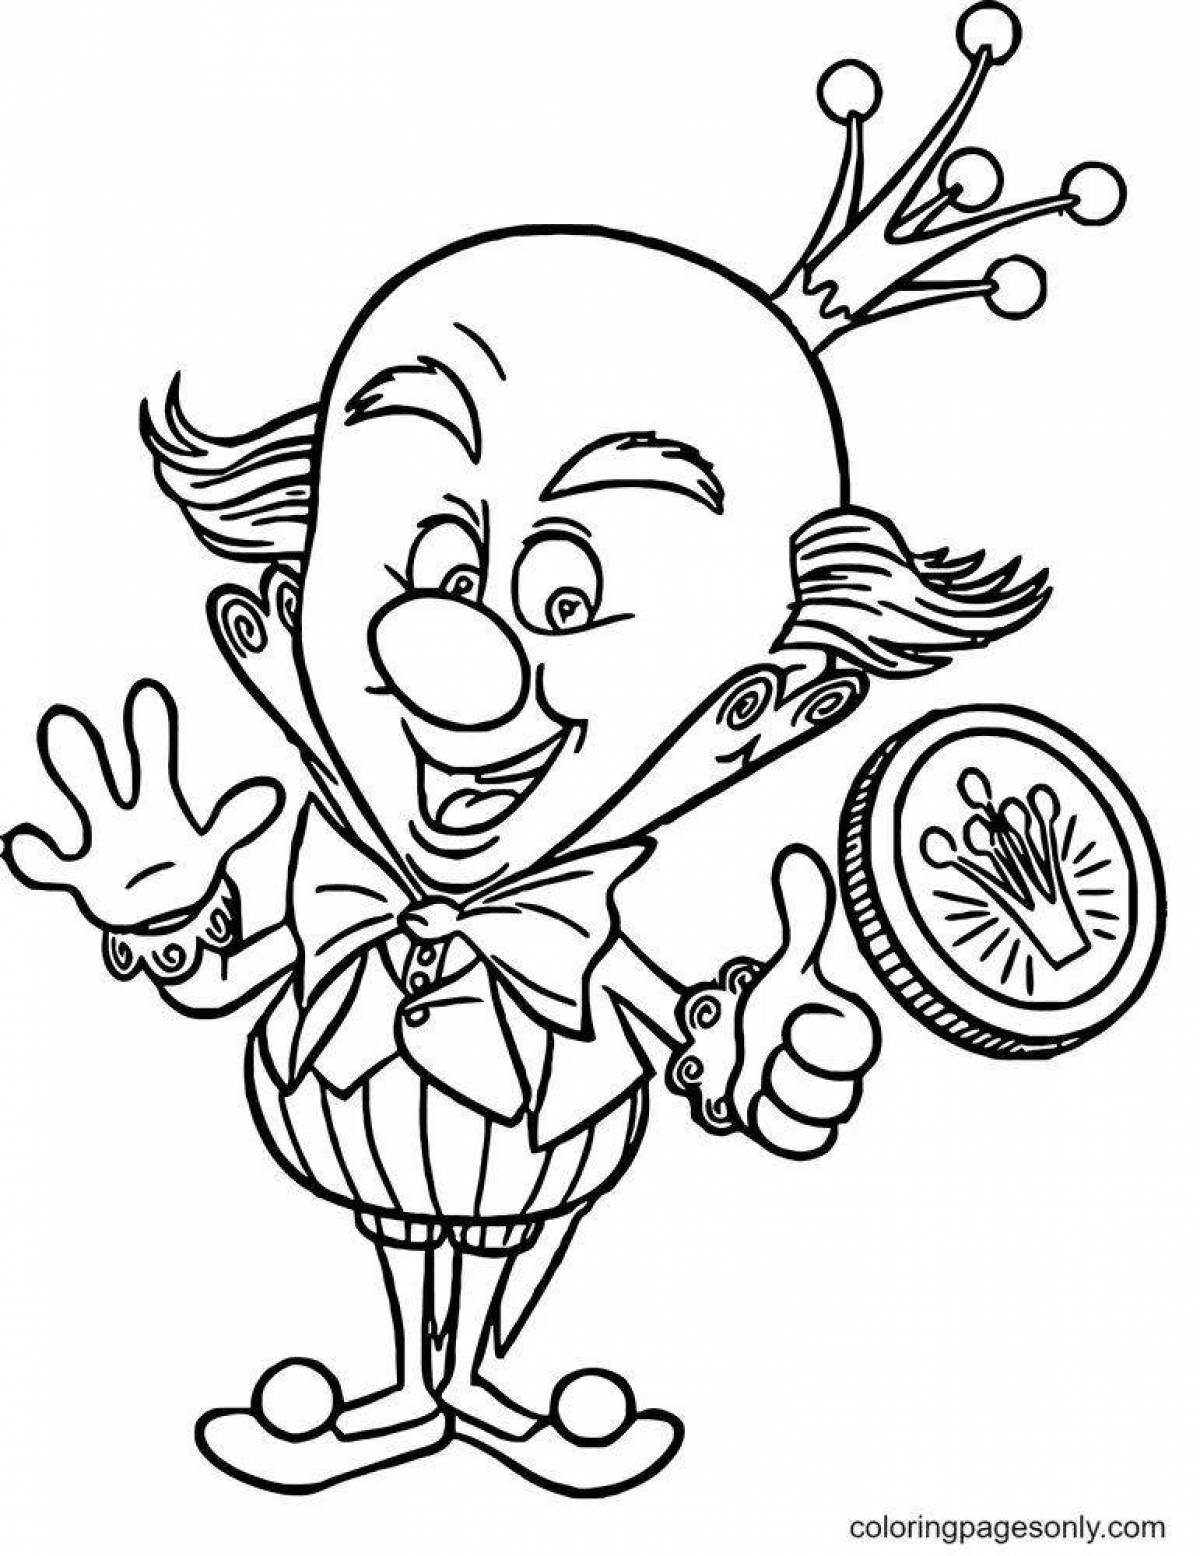 Фото Color-frenzy amelka caramel coloring page